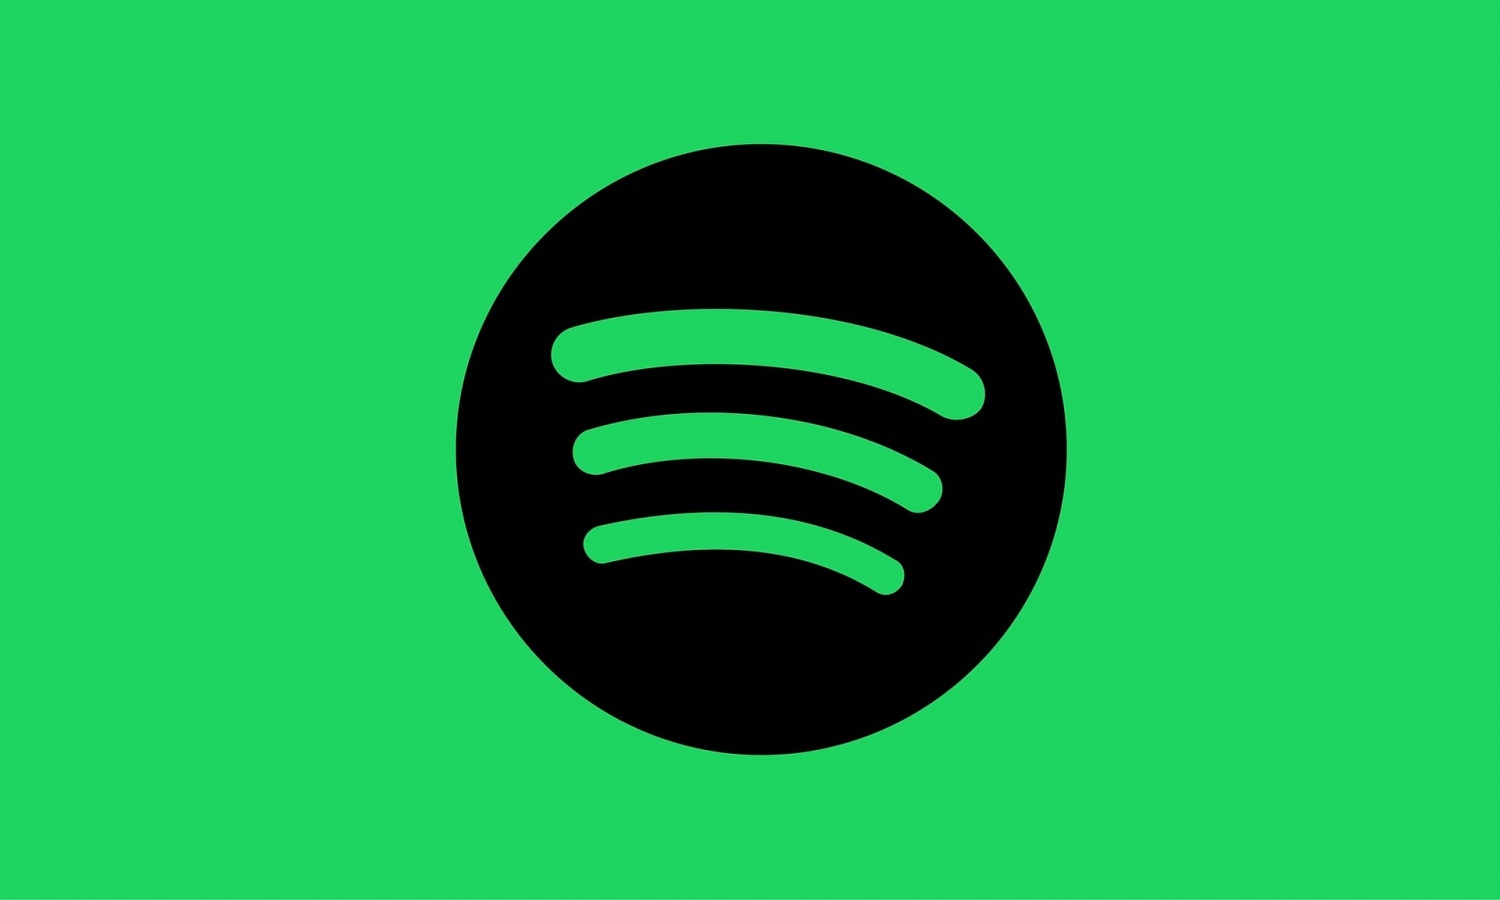 [LOOK] Spotify Adds Interesting Card-Style Layout to User Profiles